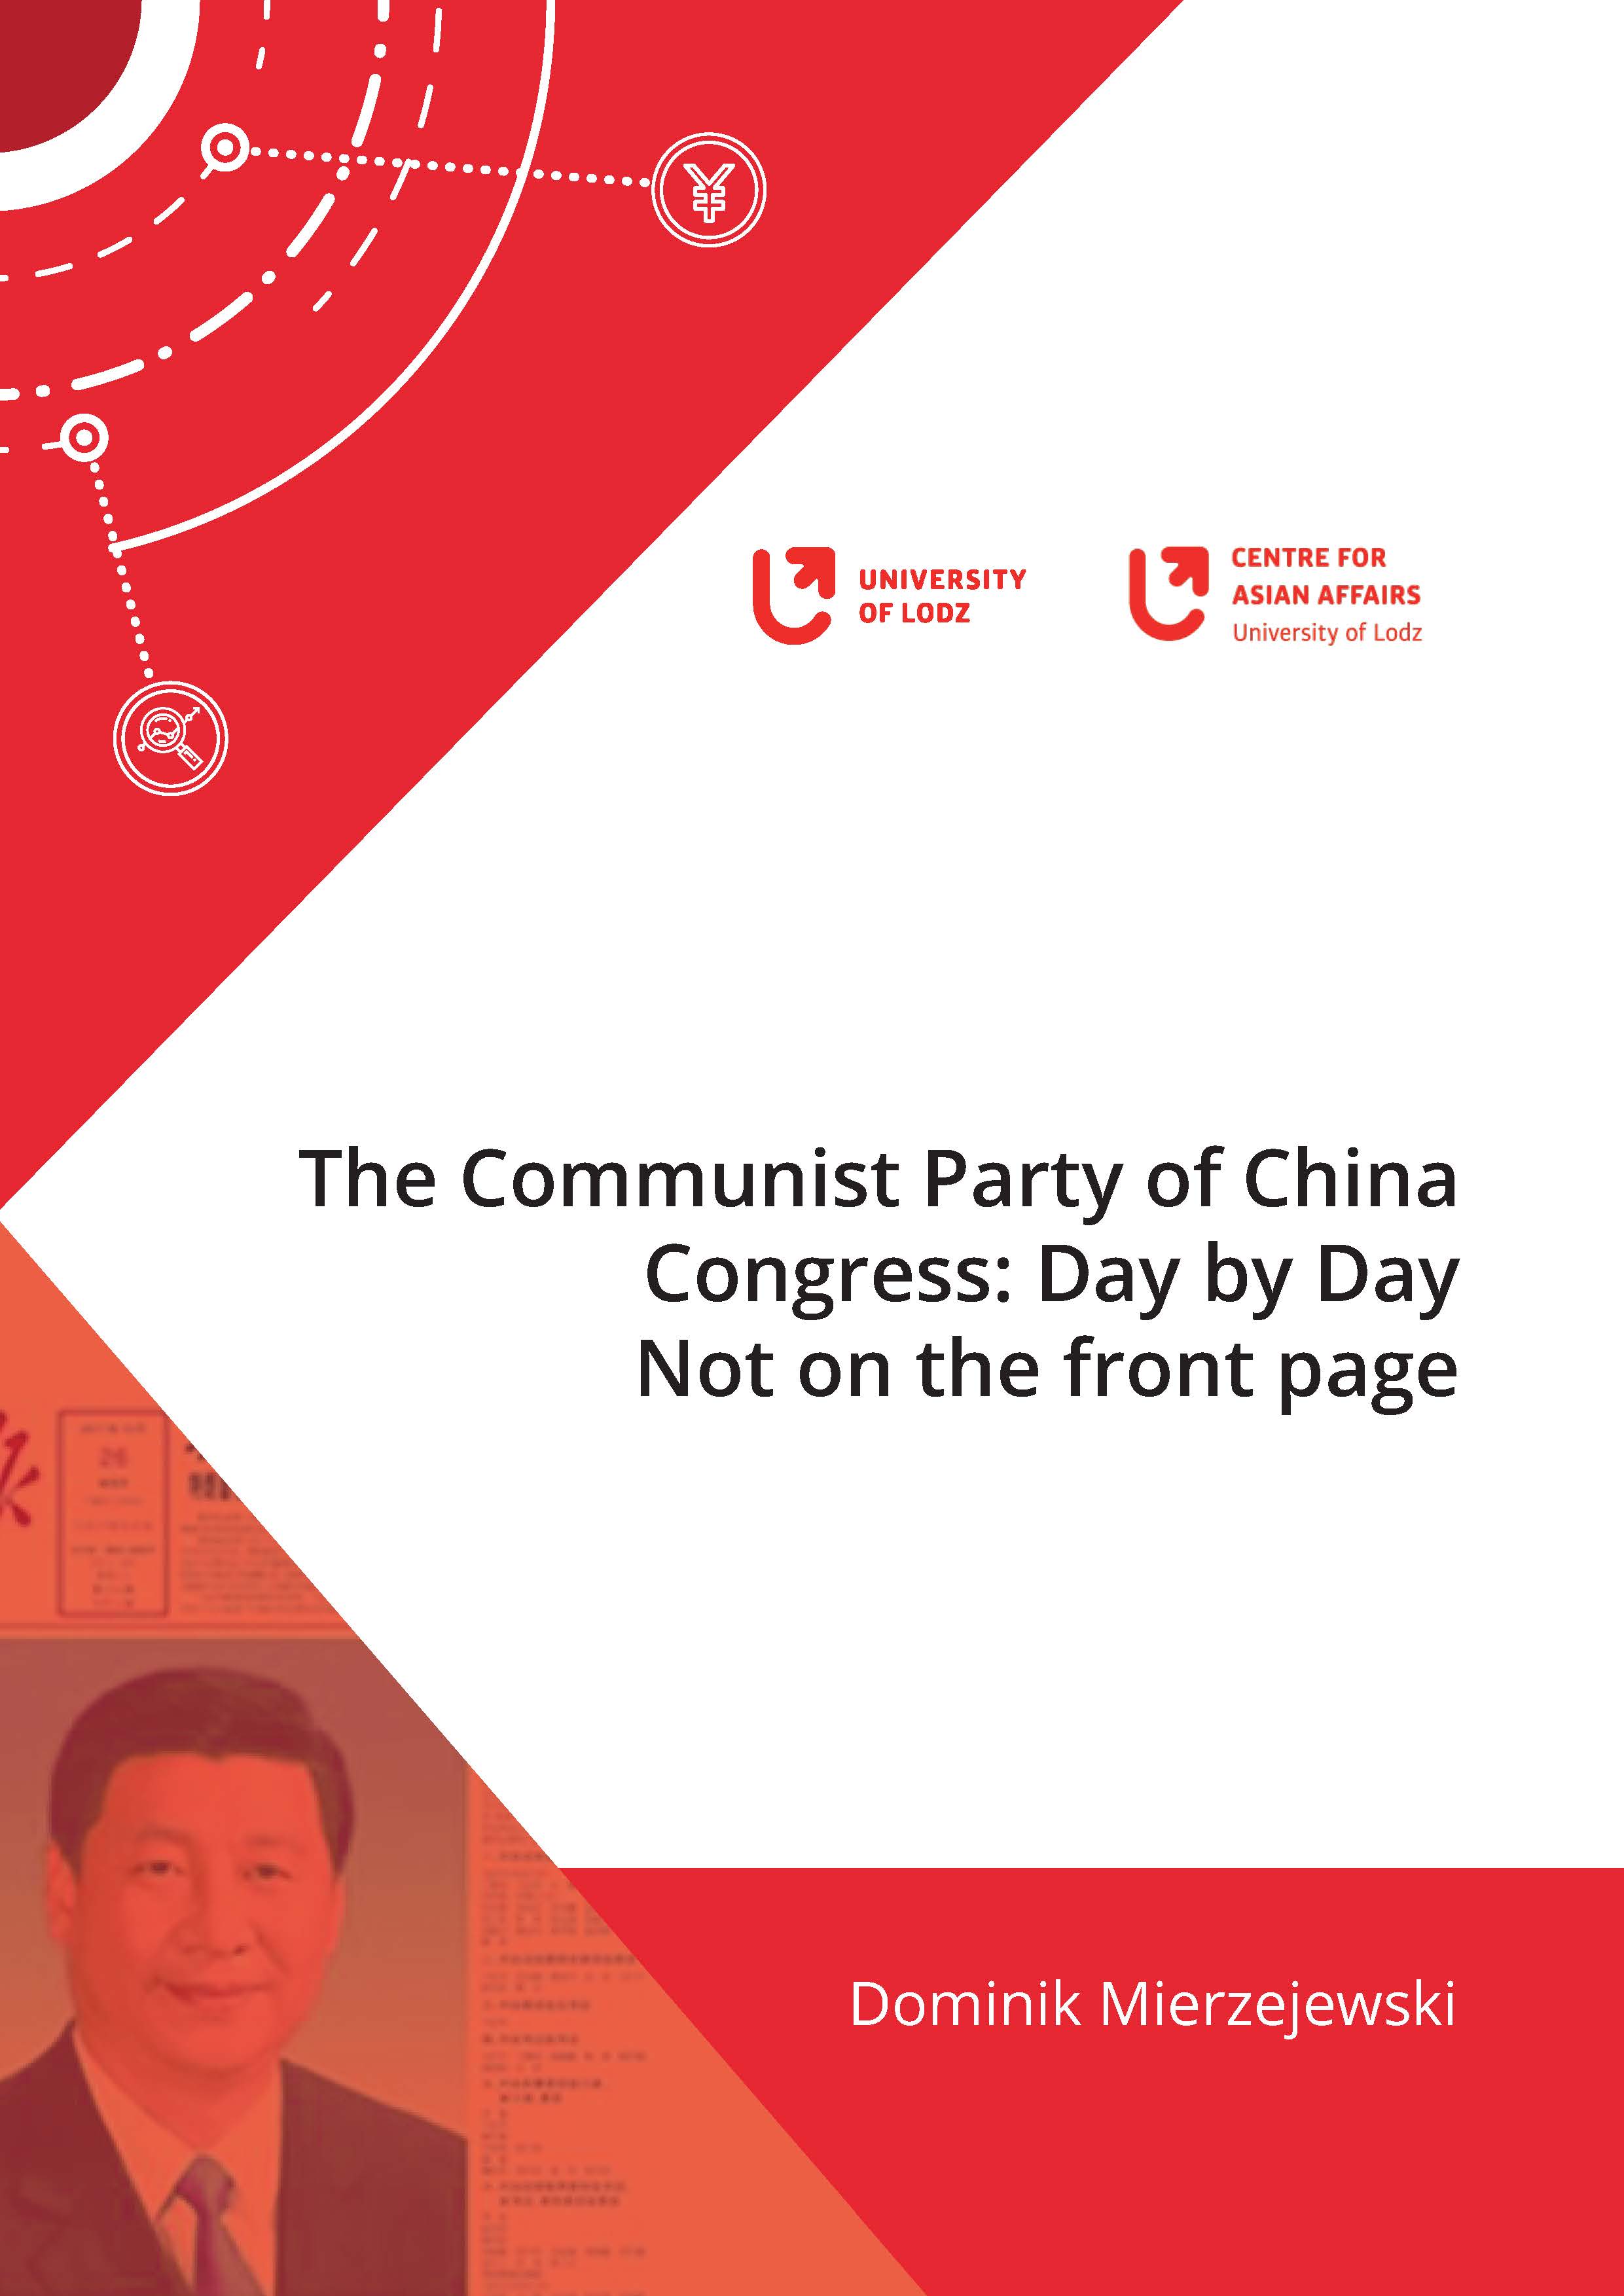 The Communist Party of China Congress: Day by Day. Not on the front page